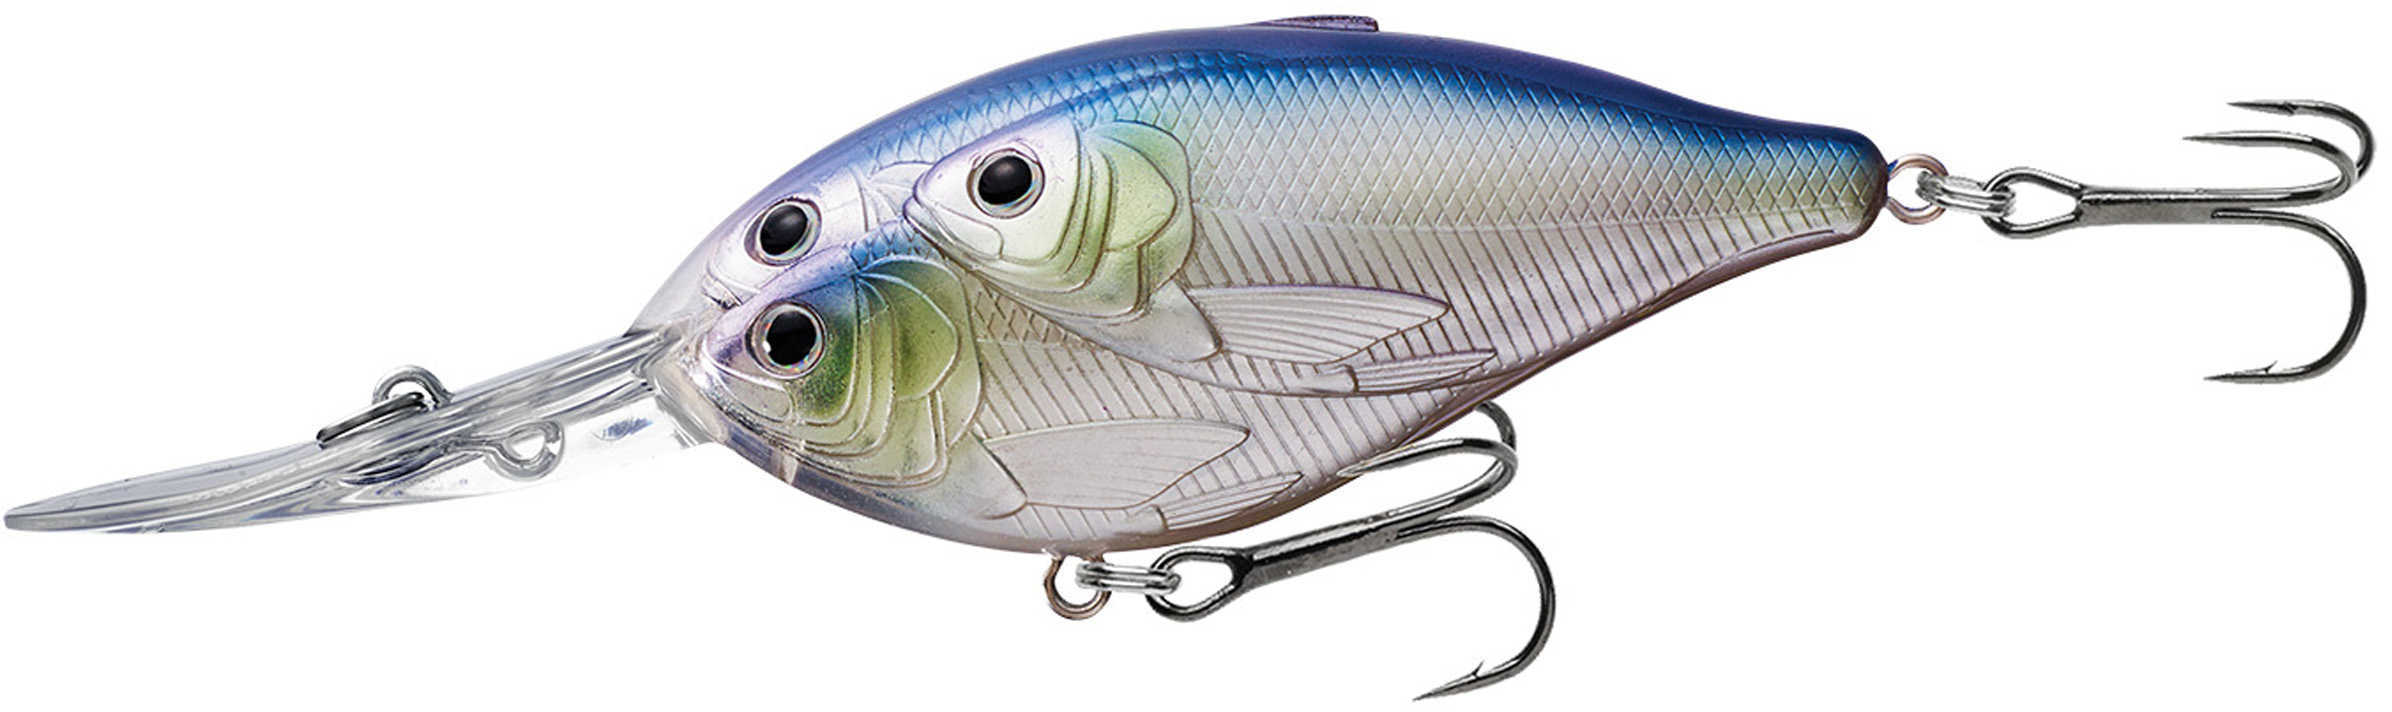 LIVETARGET Lures / Koppers Fishing and Tackle Corp Threadfin Shad Crankbait 3" Number 2 Hook Size 16 Depth Metallic Pearl/Lavender